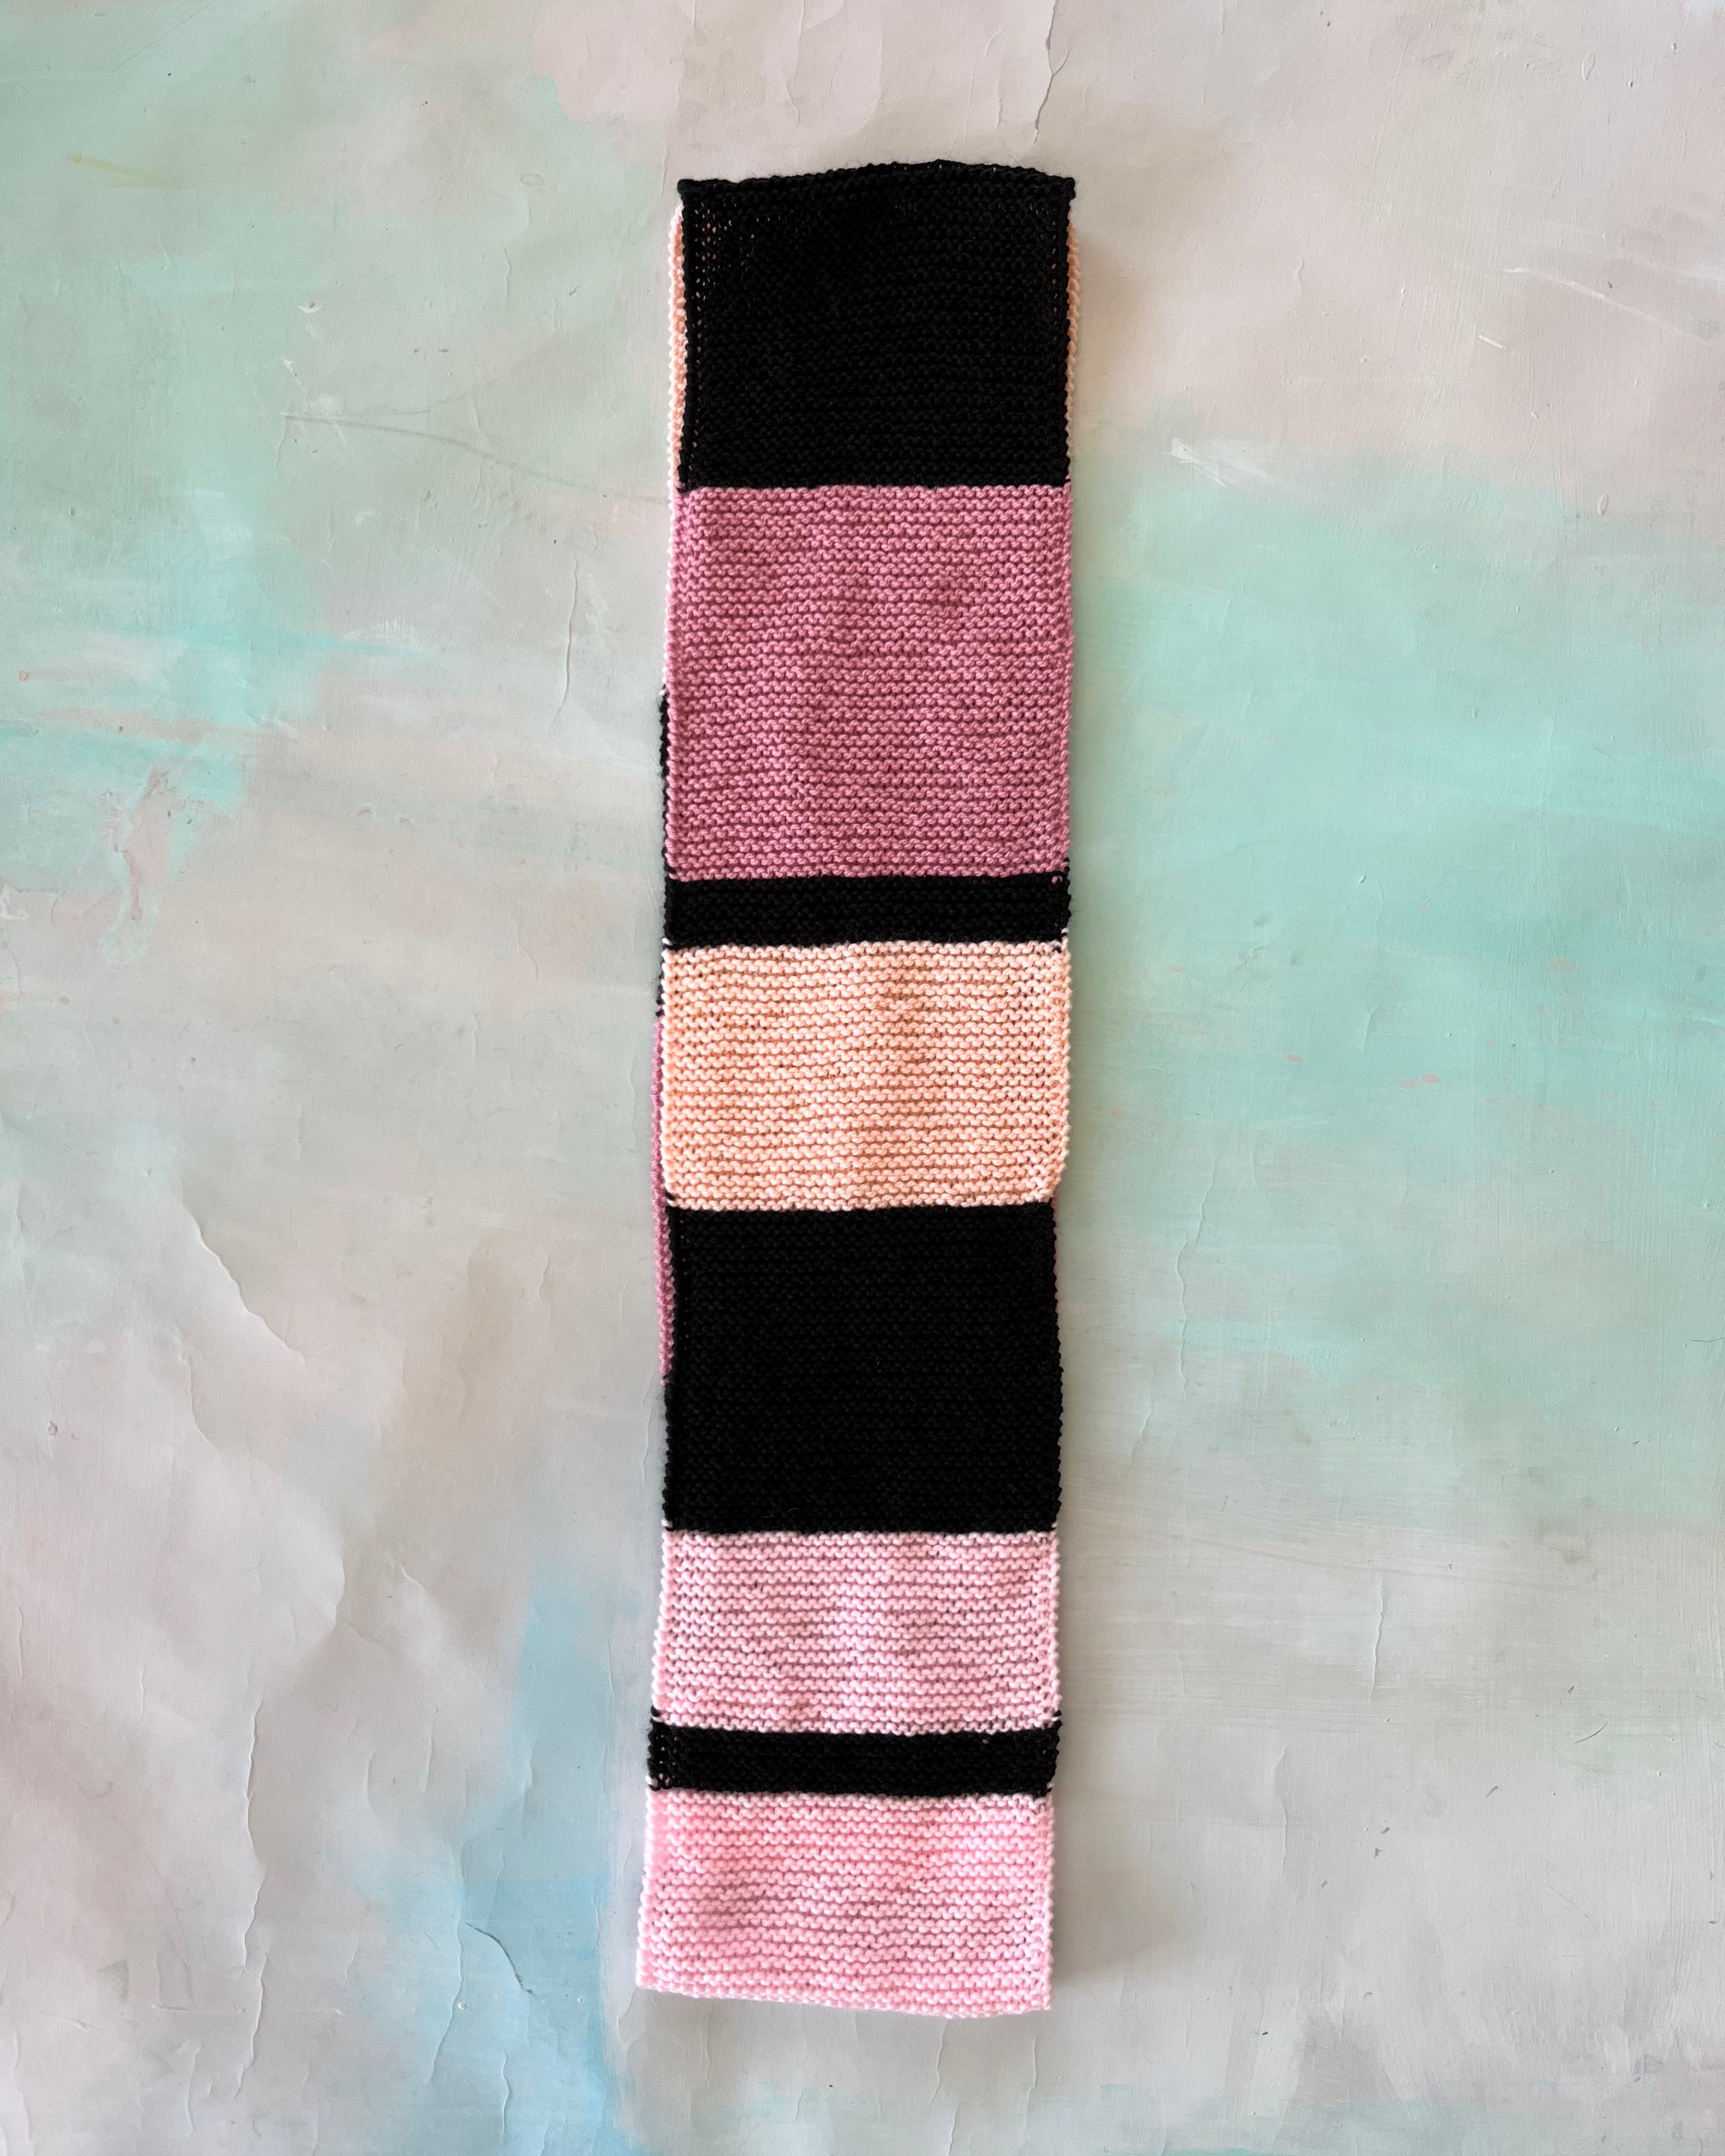 Hand Knitted Infinity Scarf Liquorice All Sorts #4